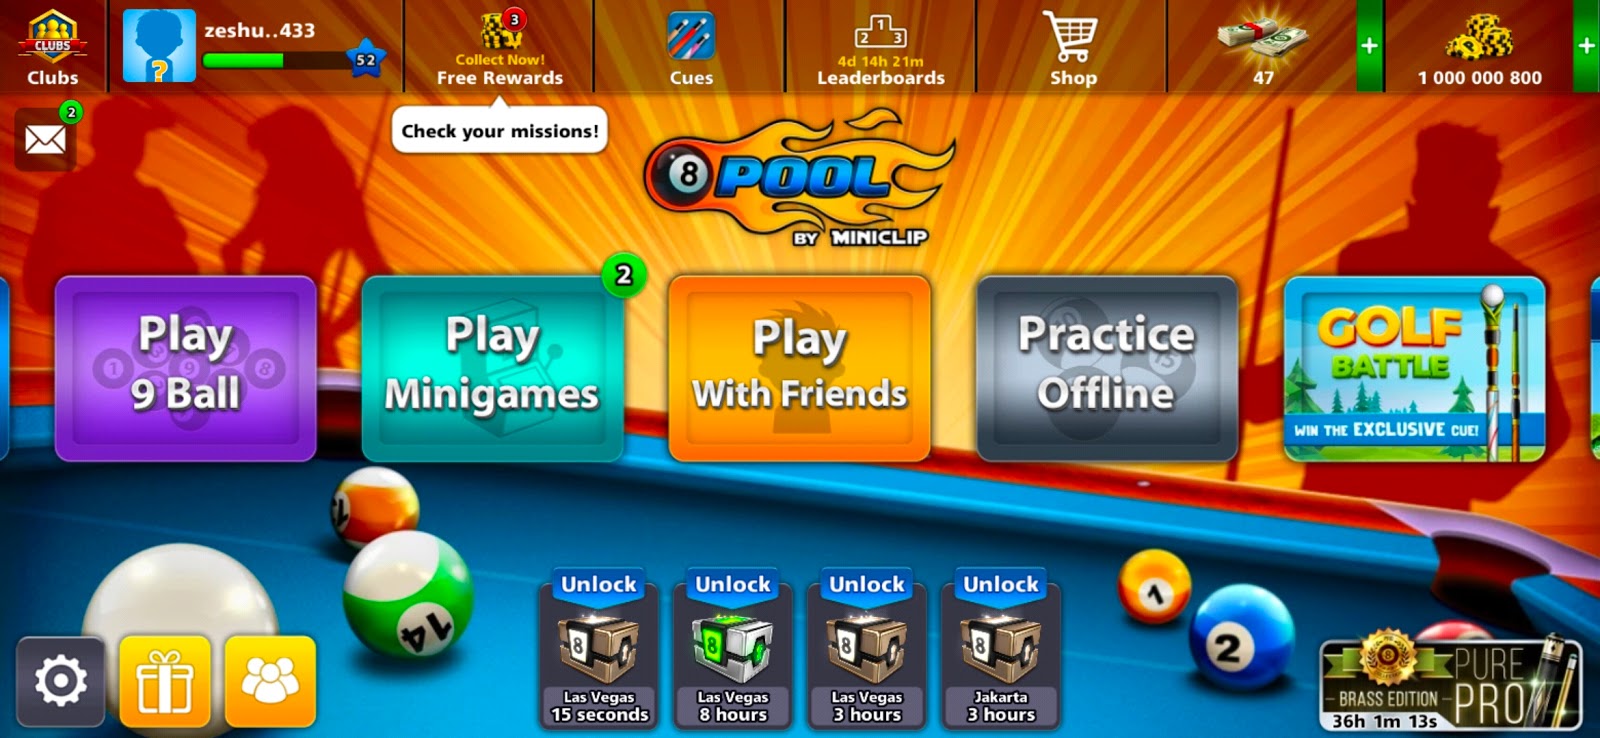 how to send coins in 8 ball pool to friends